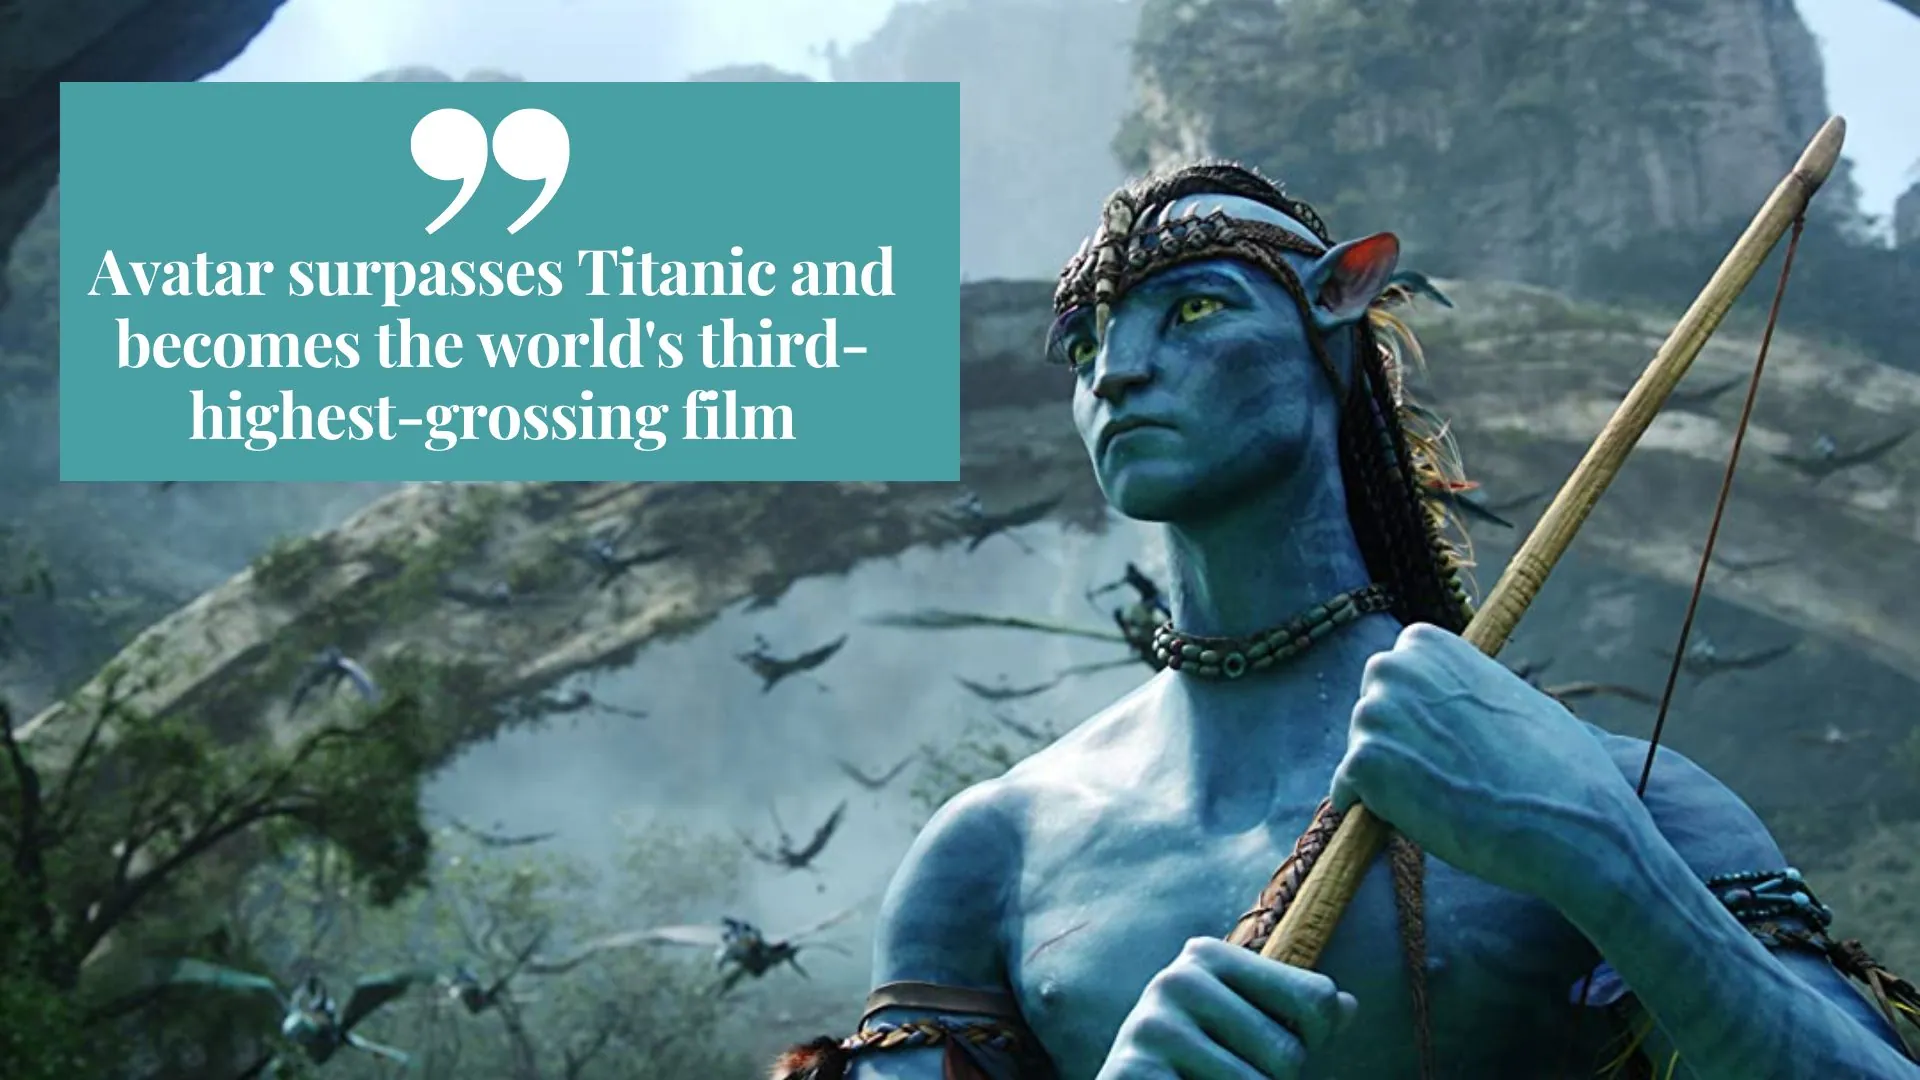 Avatar surpasses Titanic and becomes the world's third-highest-grossing film (image credit: Amazon.com)